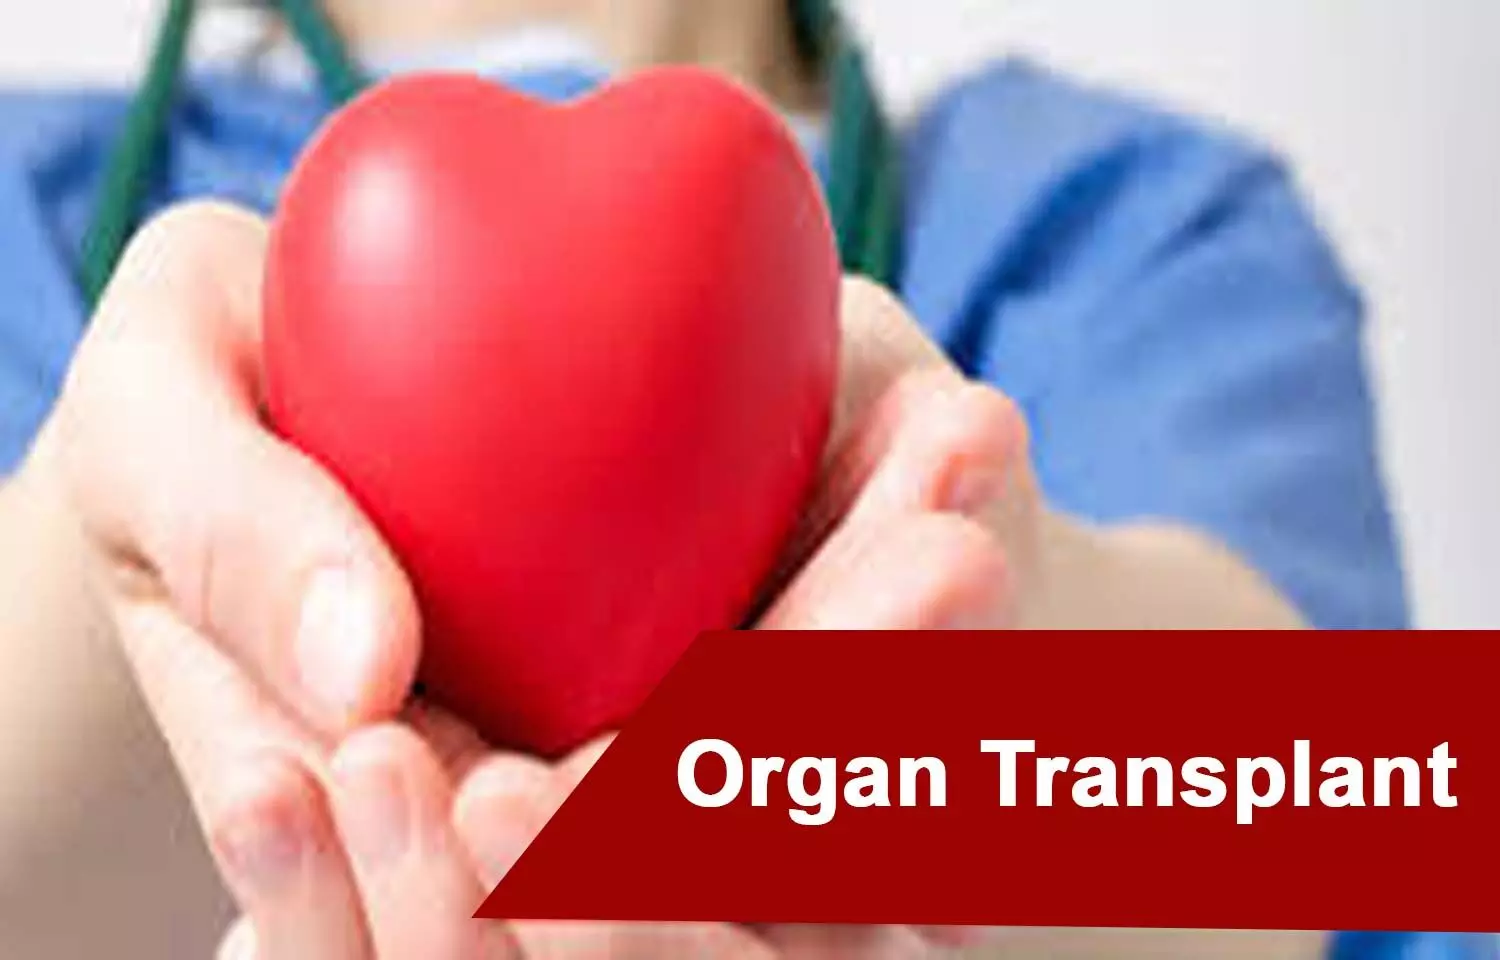 Parliamentary Committee recommends continuation of National Organ Transplant program